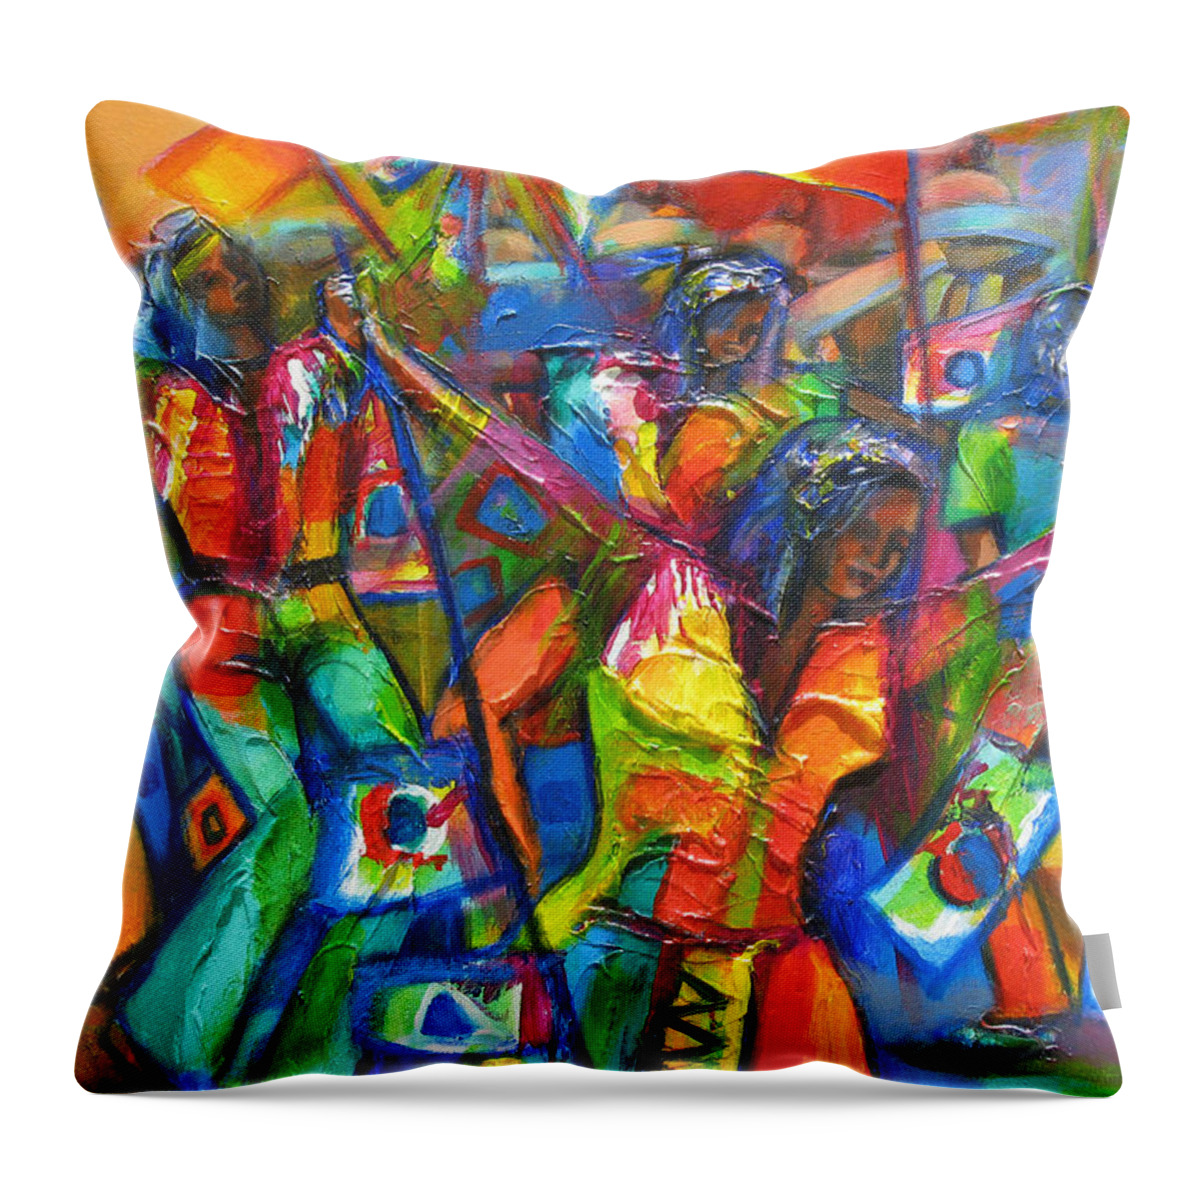 Carnival Throw Pillow featuring the painting Trinidad Carnival by Cynthia McLean